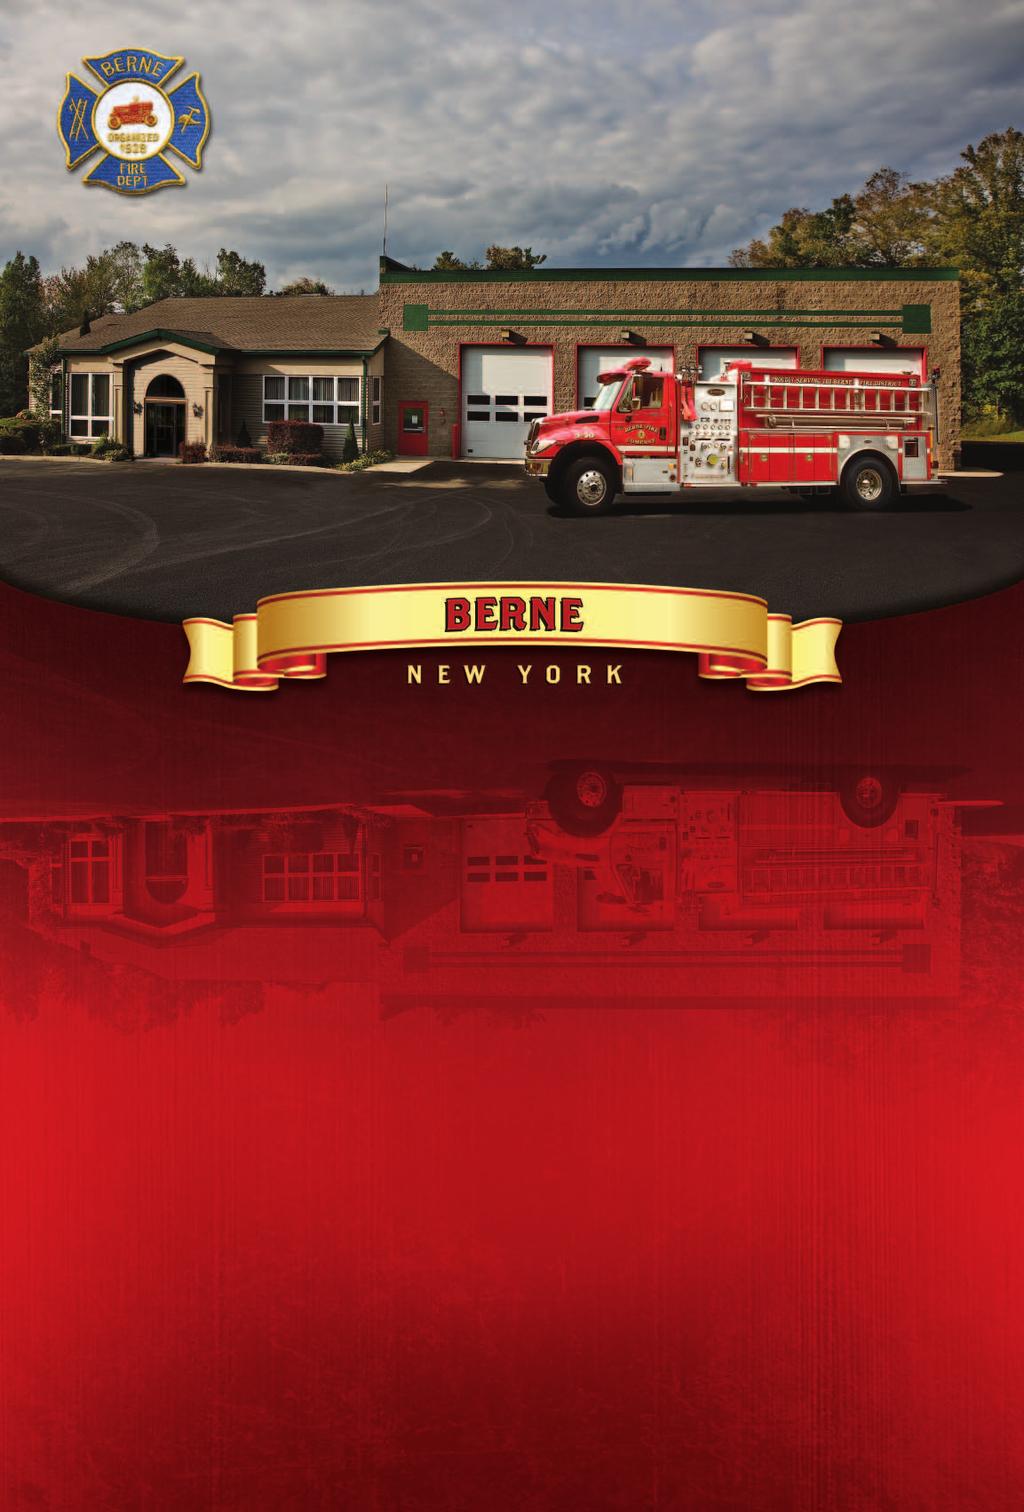 Berne Volunteer Fire Company Proudly Serving the Berne Community Since 1928 JANUARY 1 New Year s Day First Quarter Moon 2 3 4 5 6 7 8 9 Full Moon 10 11 12 13 14 15 16 Martin Luther King Jr.